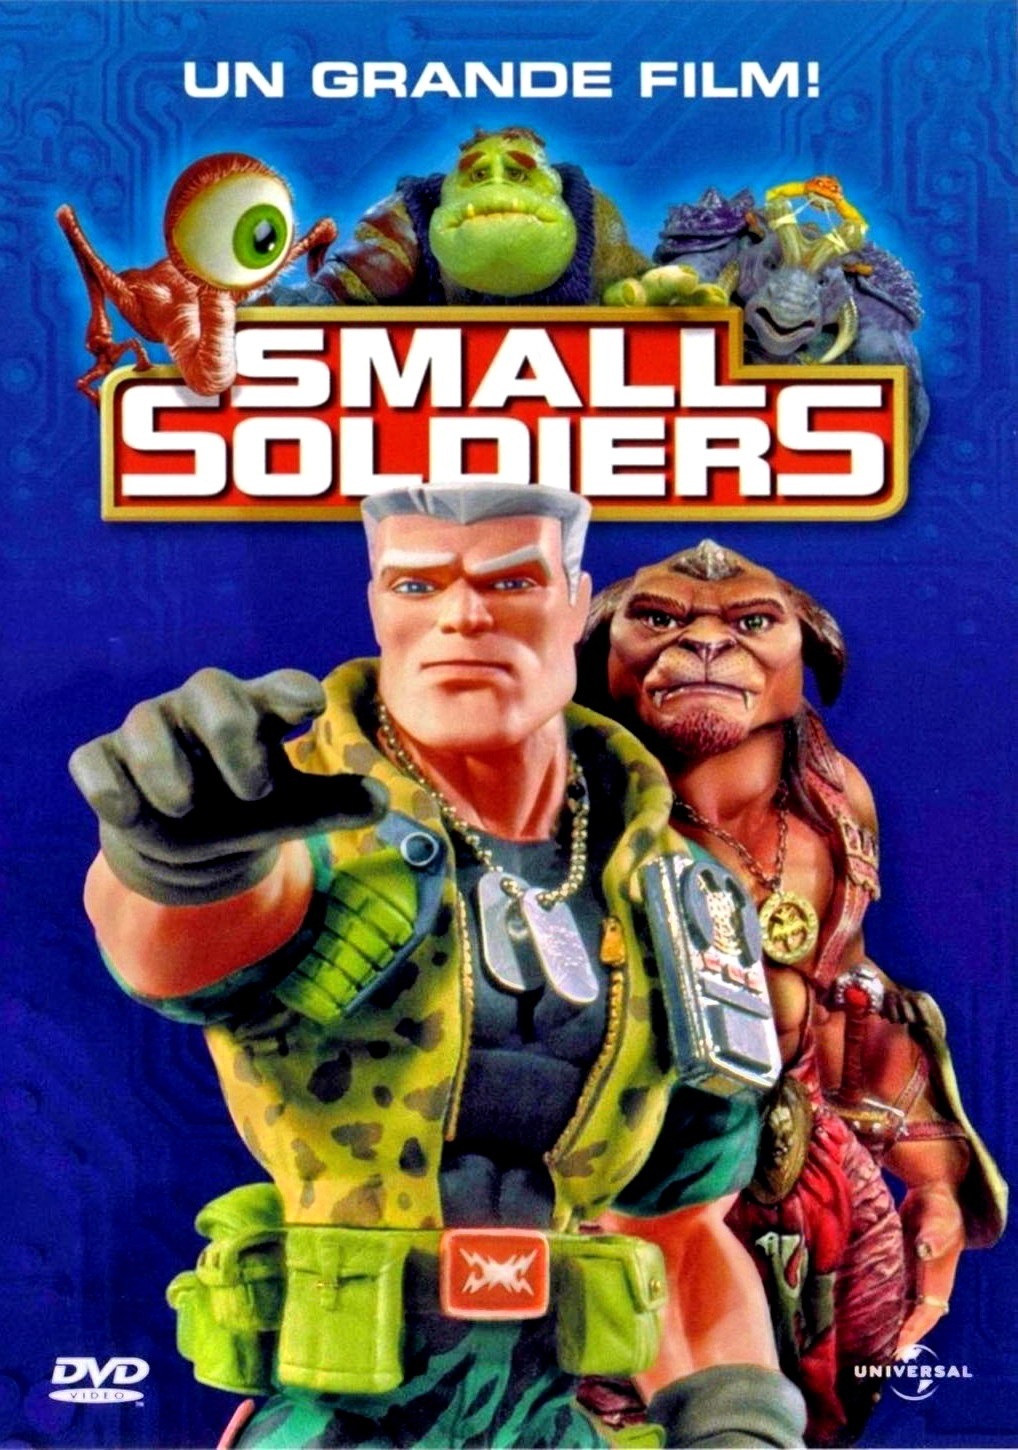 Small Soldiers Photo Background Wallpaper Image